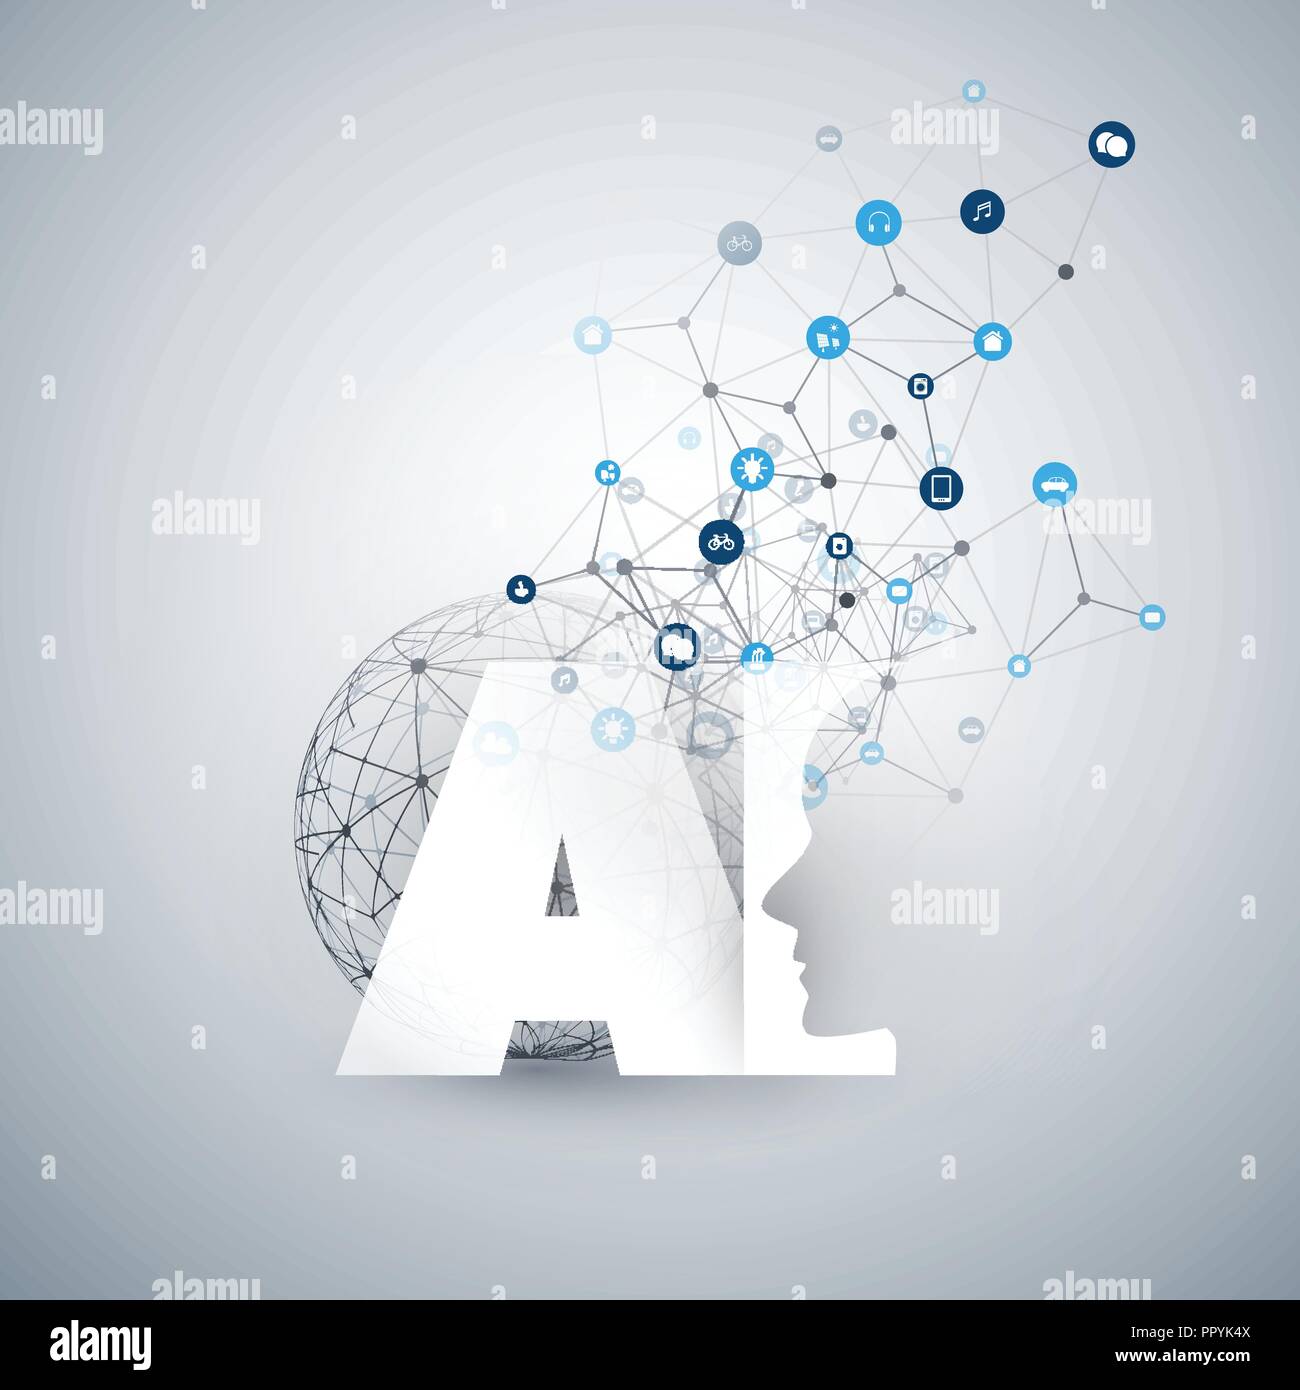 Artificial Intelligence, Internet of Things and Smart Technology ...